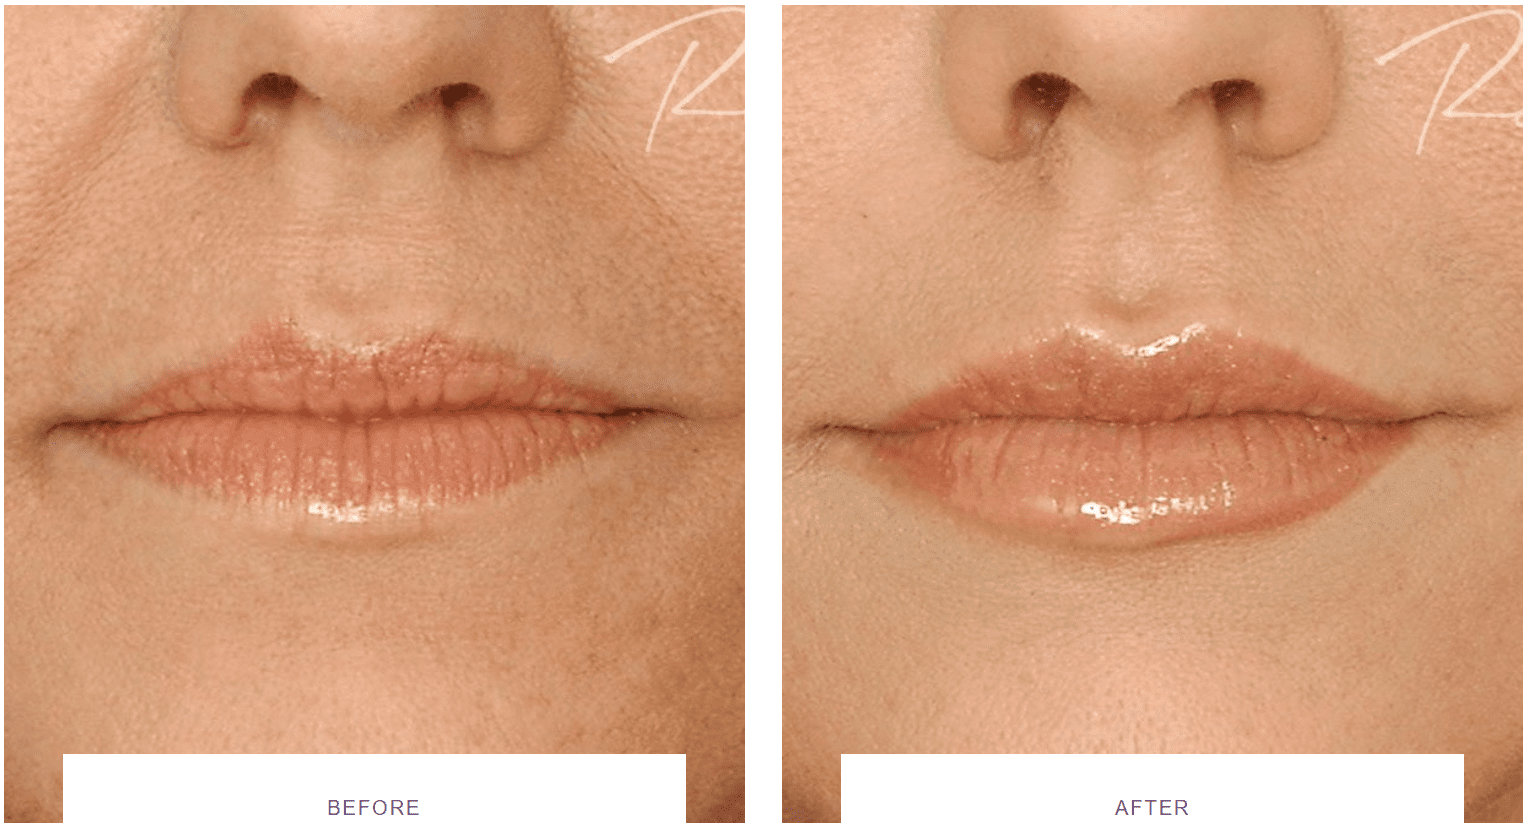 lip hydration and shape filler with Restylane before and after